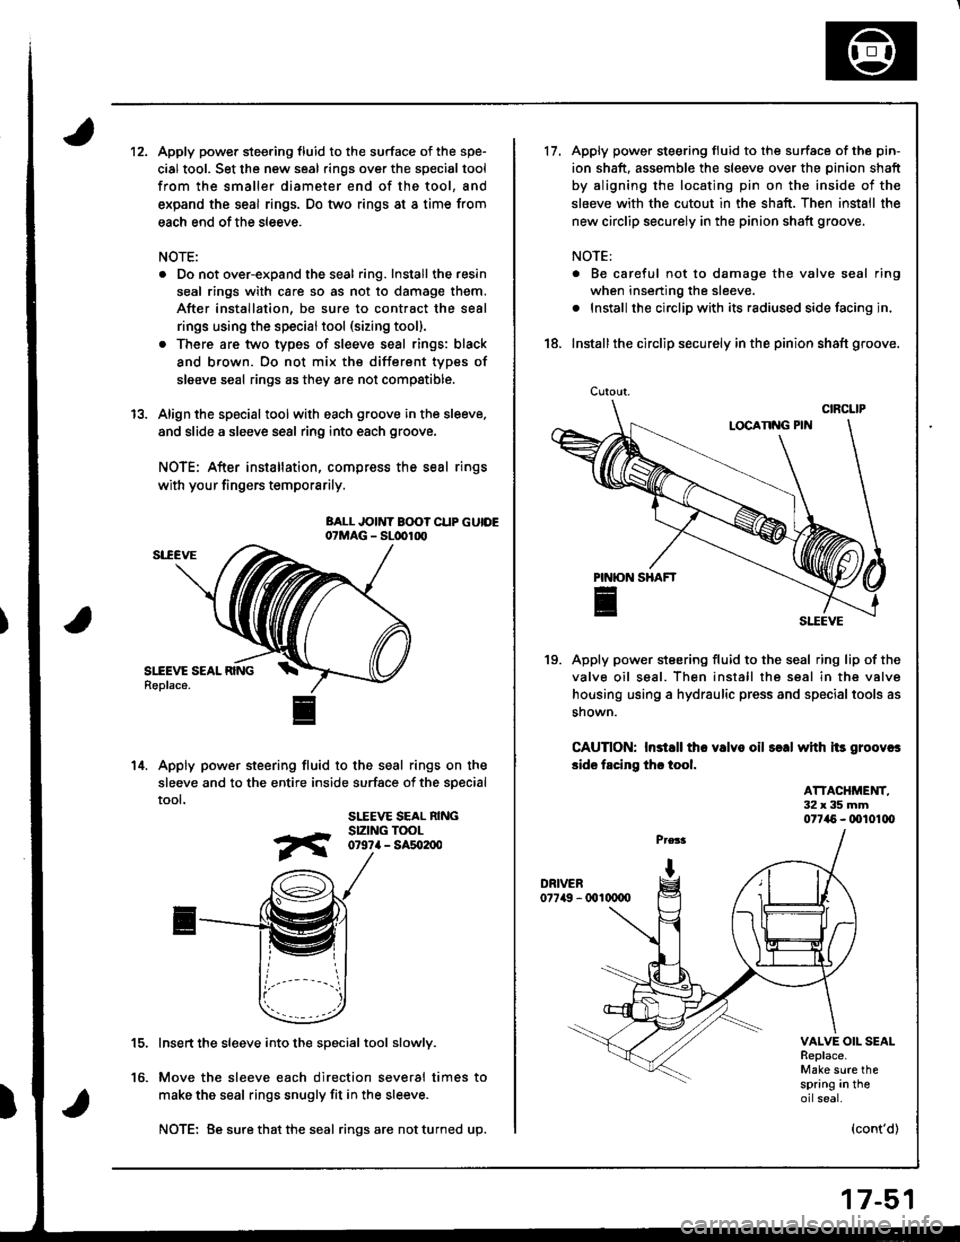 HONDA INTEGRA 1998 4.G Workshop Manual 12.Apply power steering fluid to the surface of the spe-
cial tool. Set the new seal rings over the special tool
from the smaller diameter end of the tool, and
expand the seal rings. Do two rings at a